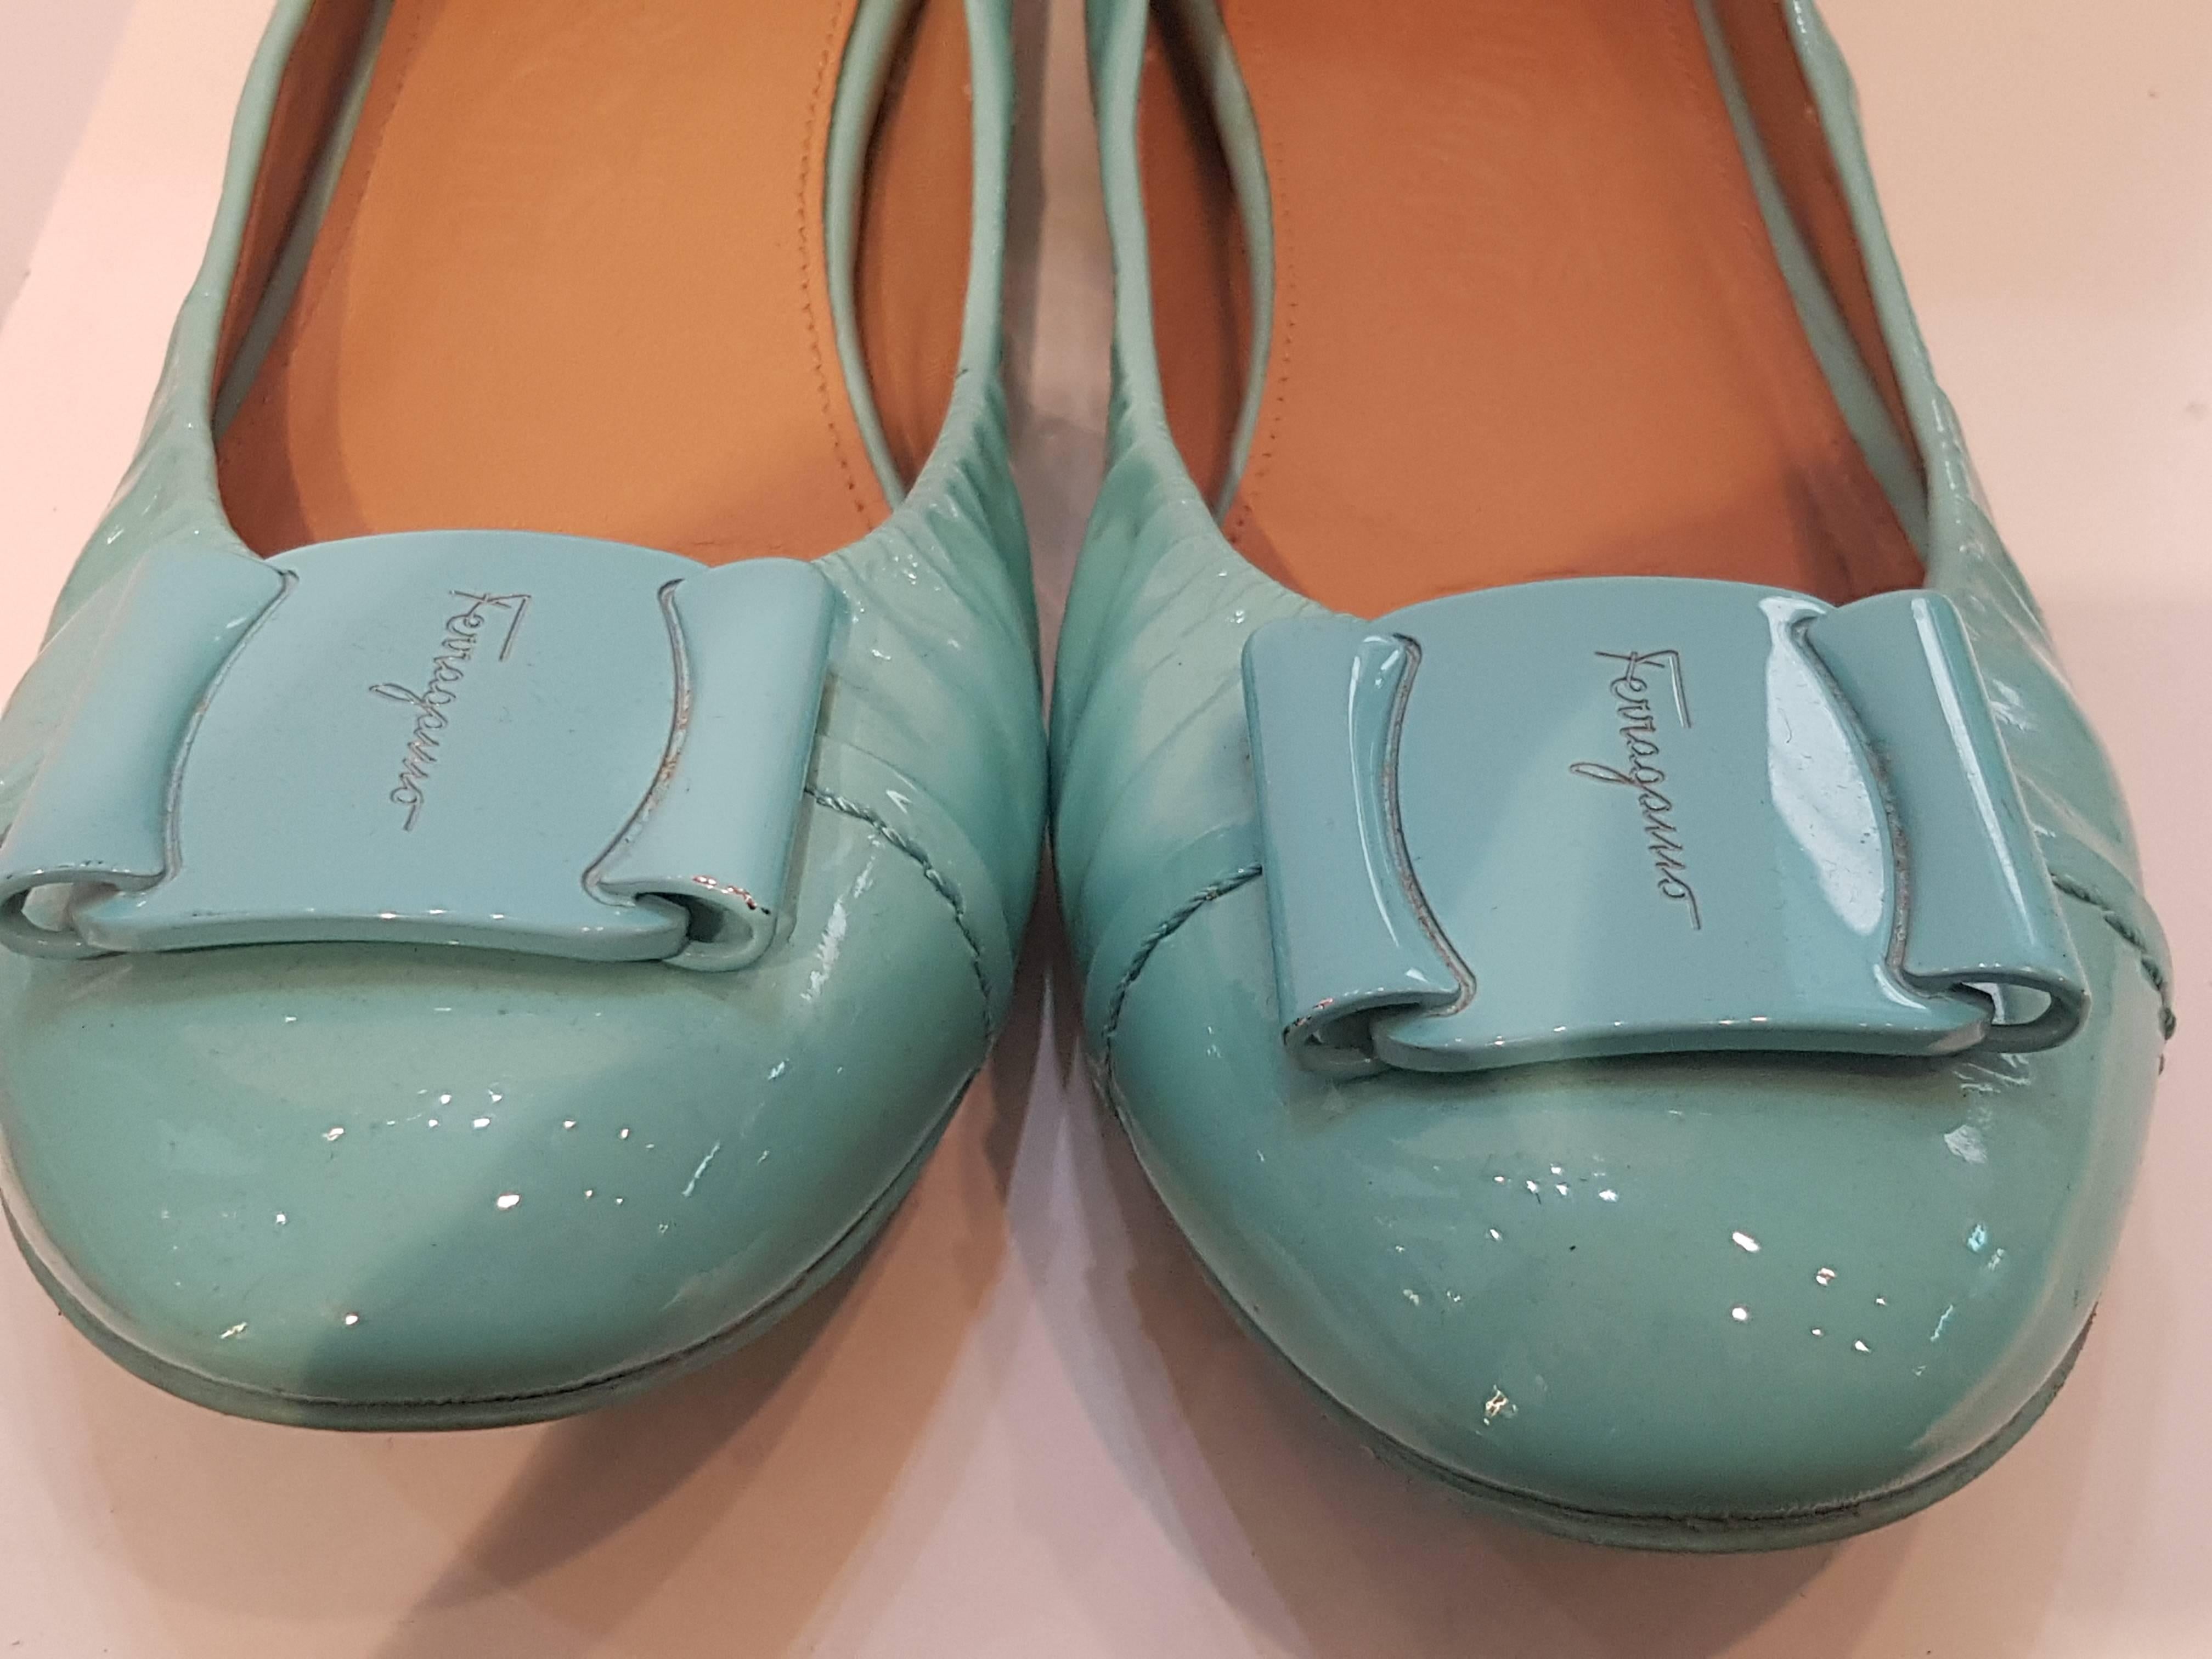 Salvatore Ferragamo Light blue varnish leather ballerina
Totally made in italy still with box
size: 37